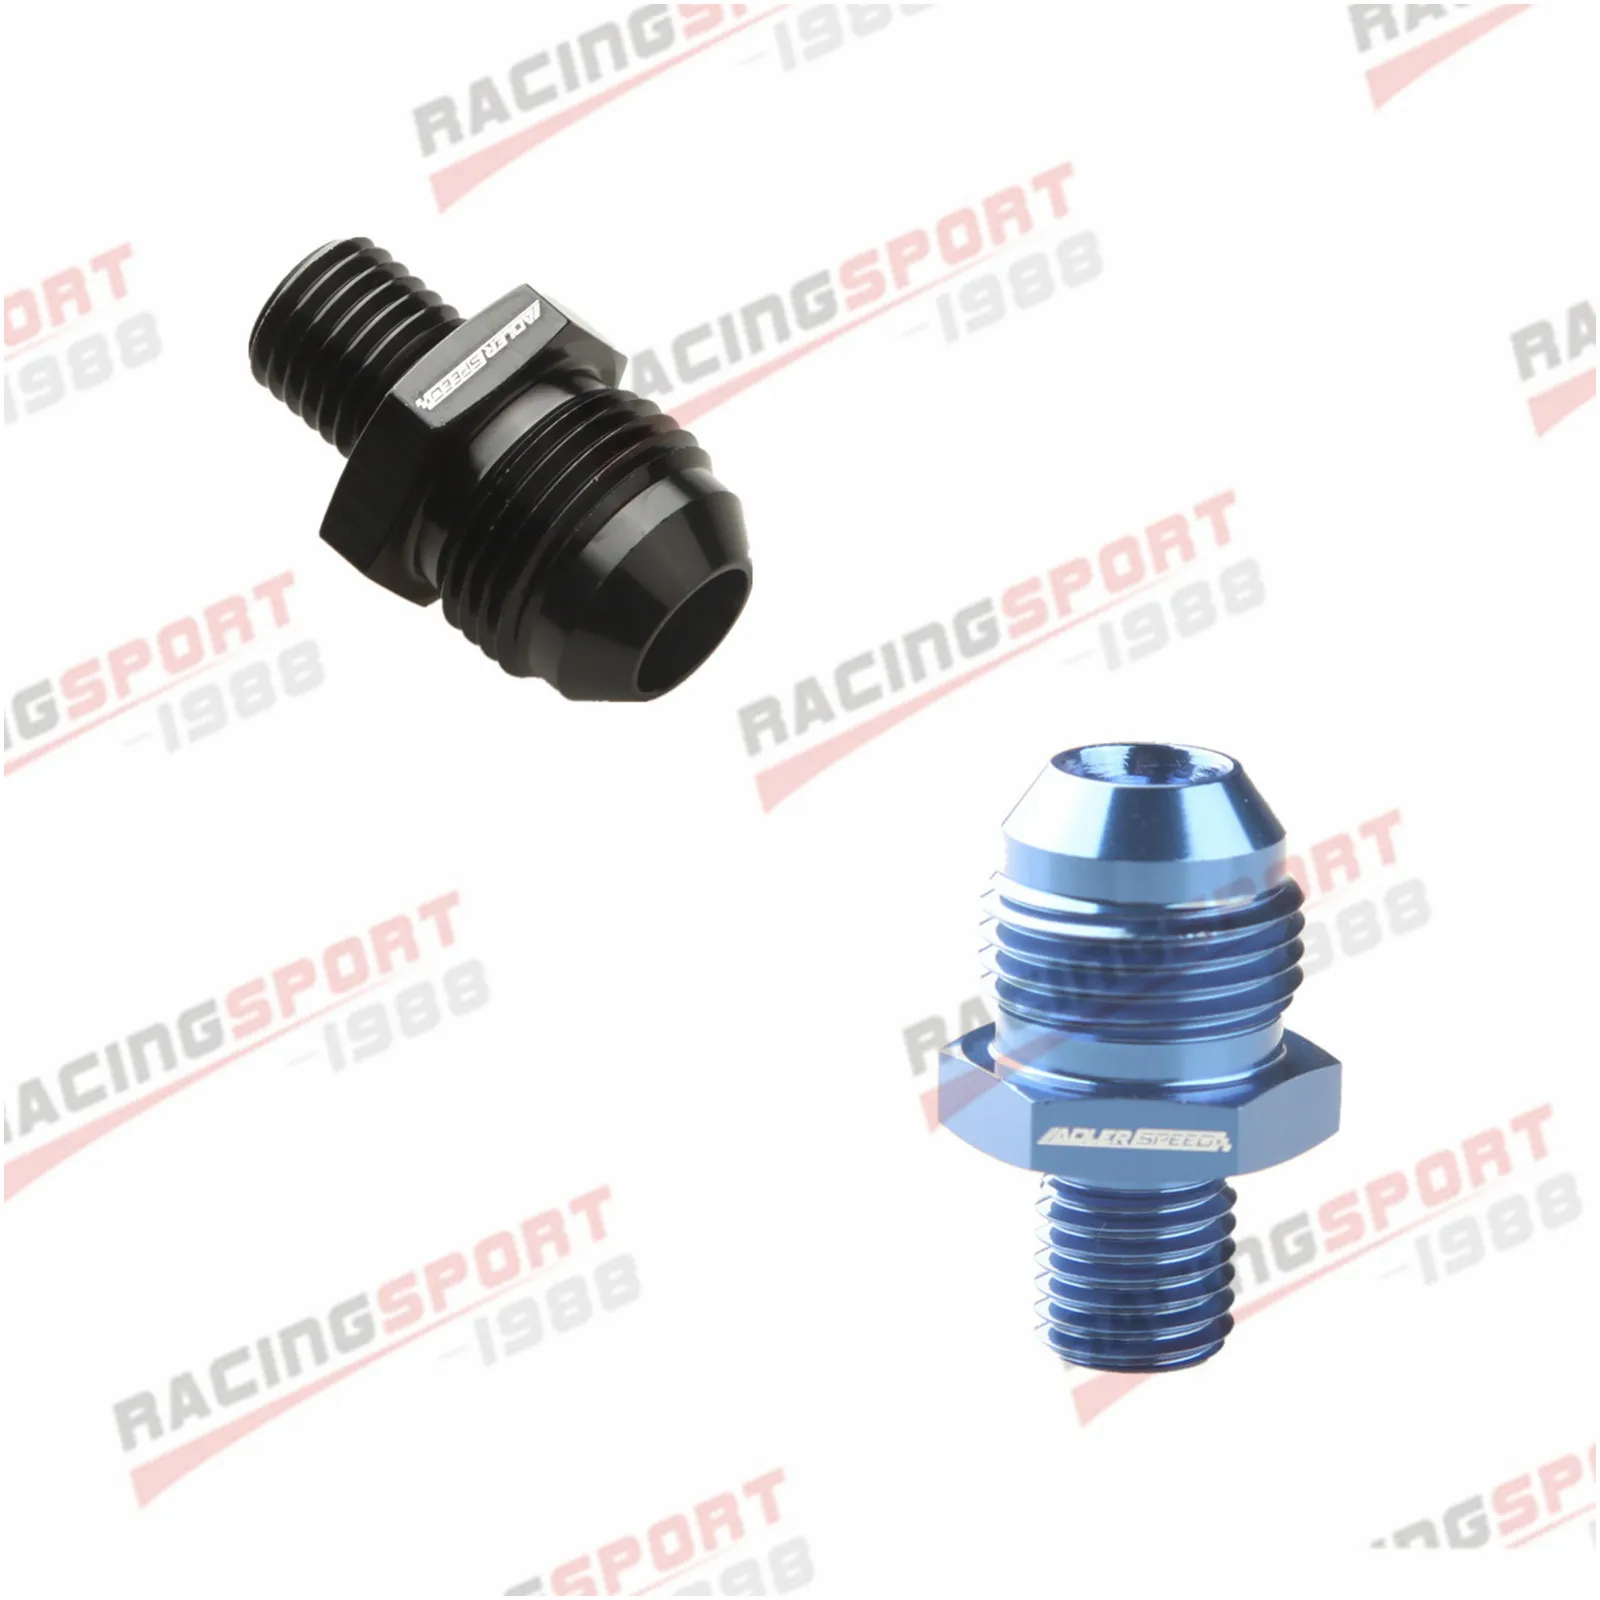 

ADLERSPEED 6AN AN-6 Male Flare To M10x1.5 (MM) Metric Straight Fitting Adapter Blue/Black